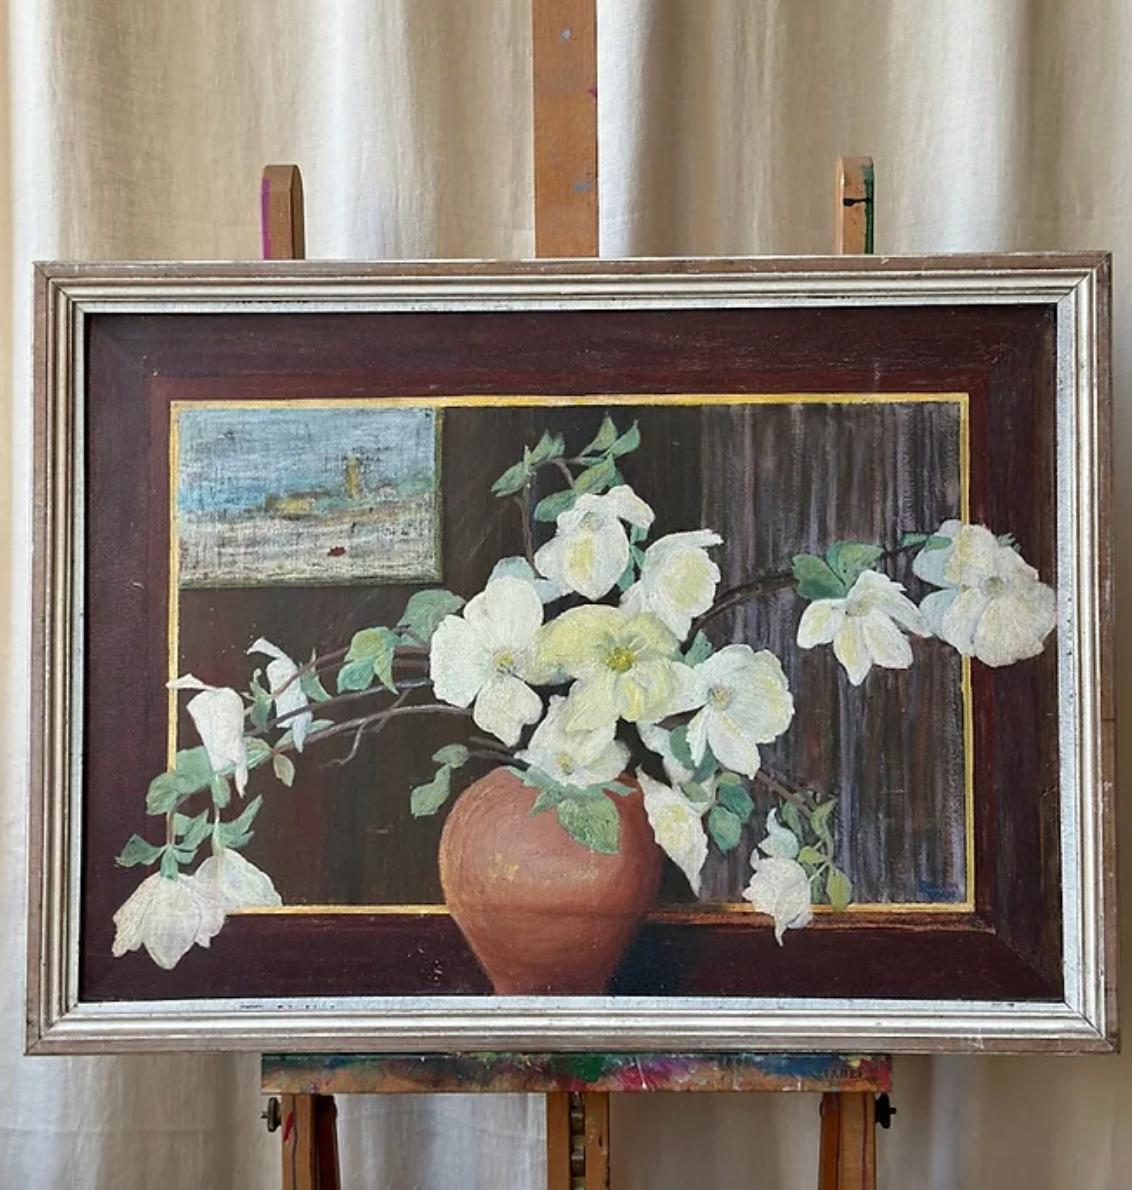 20th Century Floral Reflection Oil,

Spreading the height and width of this striking composition is a large mantle mirror, cleverly extenuating the real and reflective view of this elegant display of magnolia branches. Unsigned.

The painting has